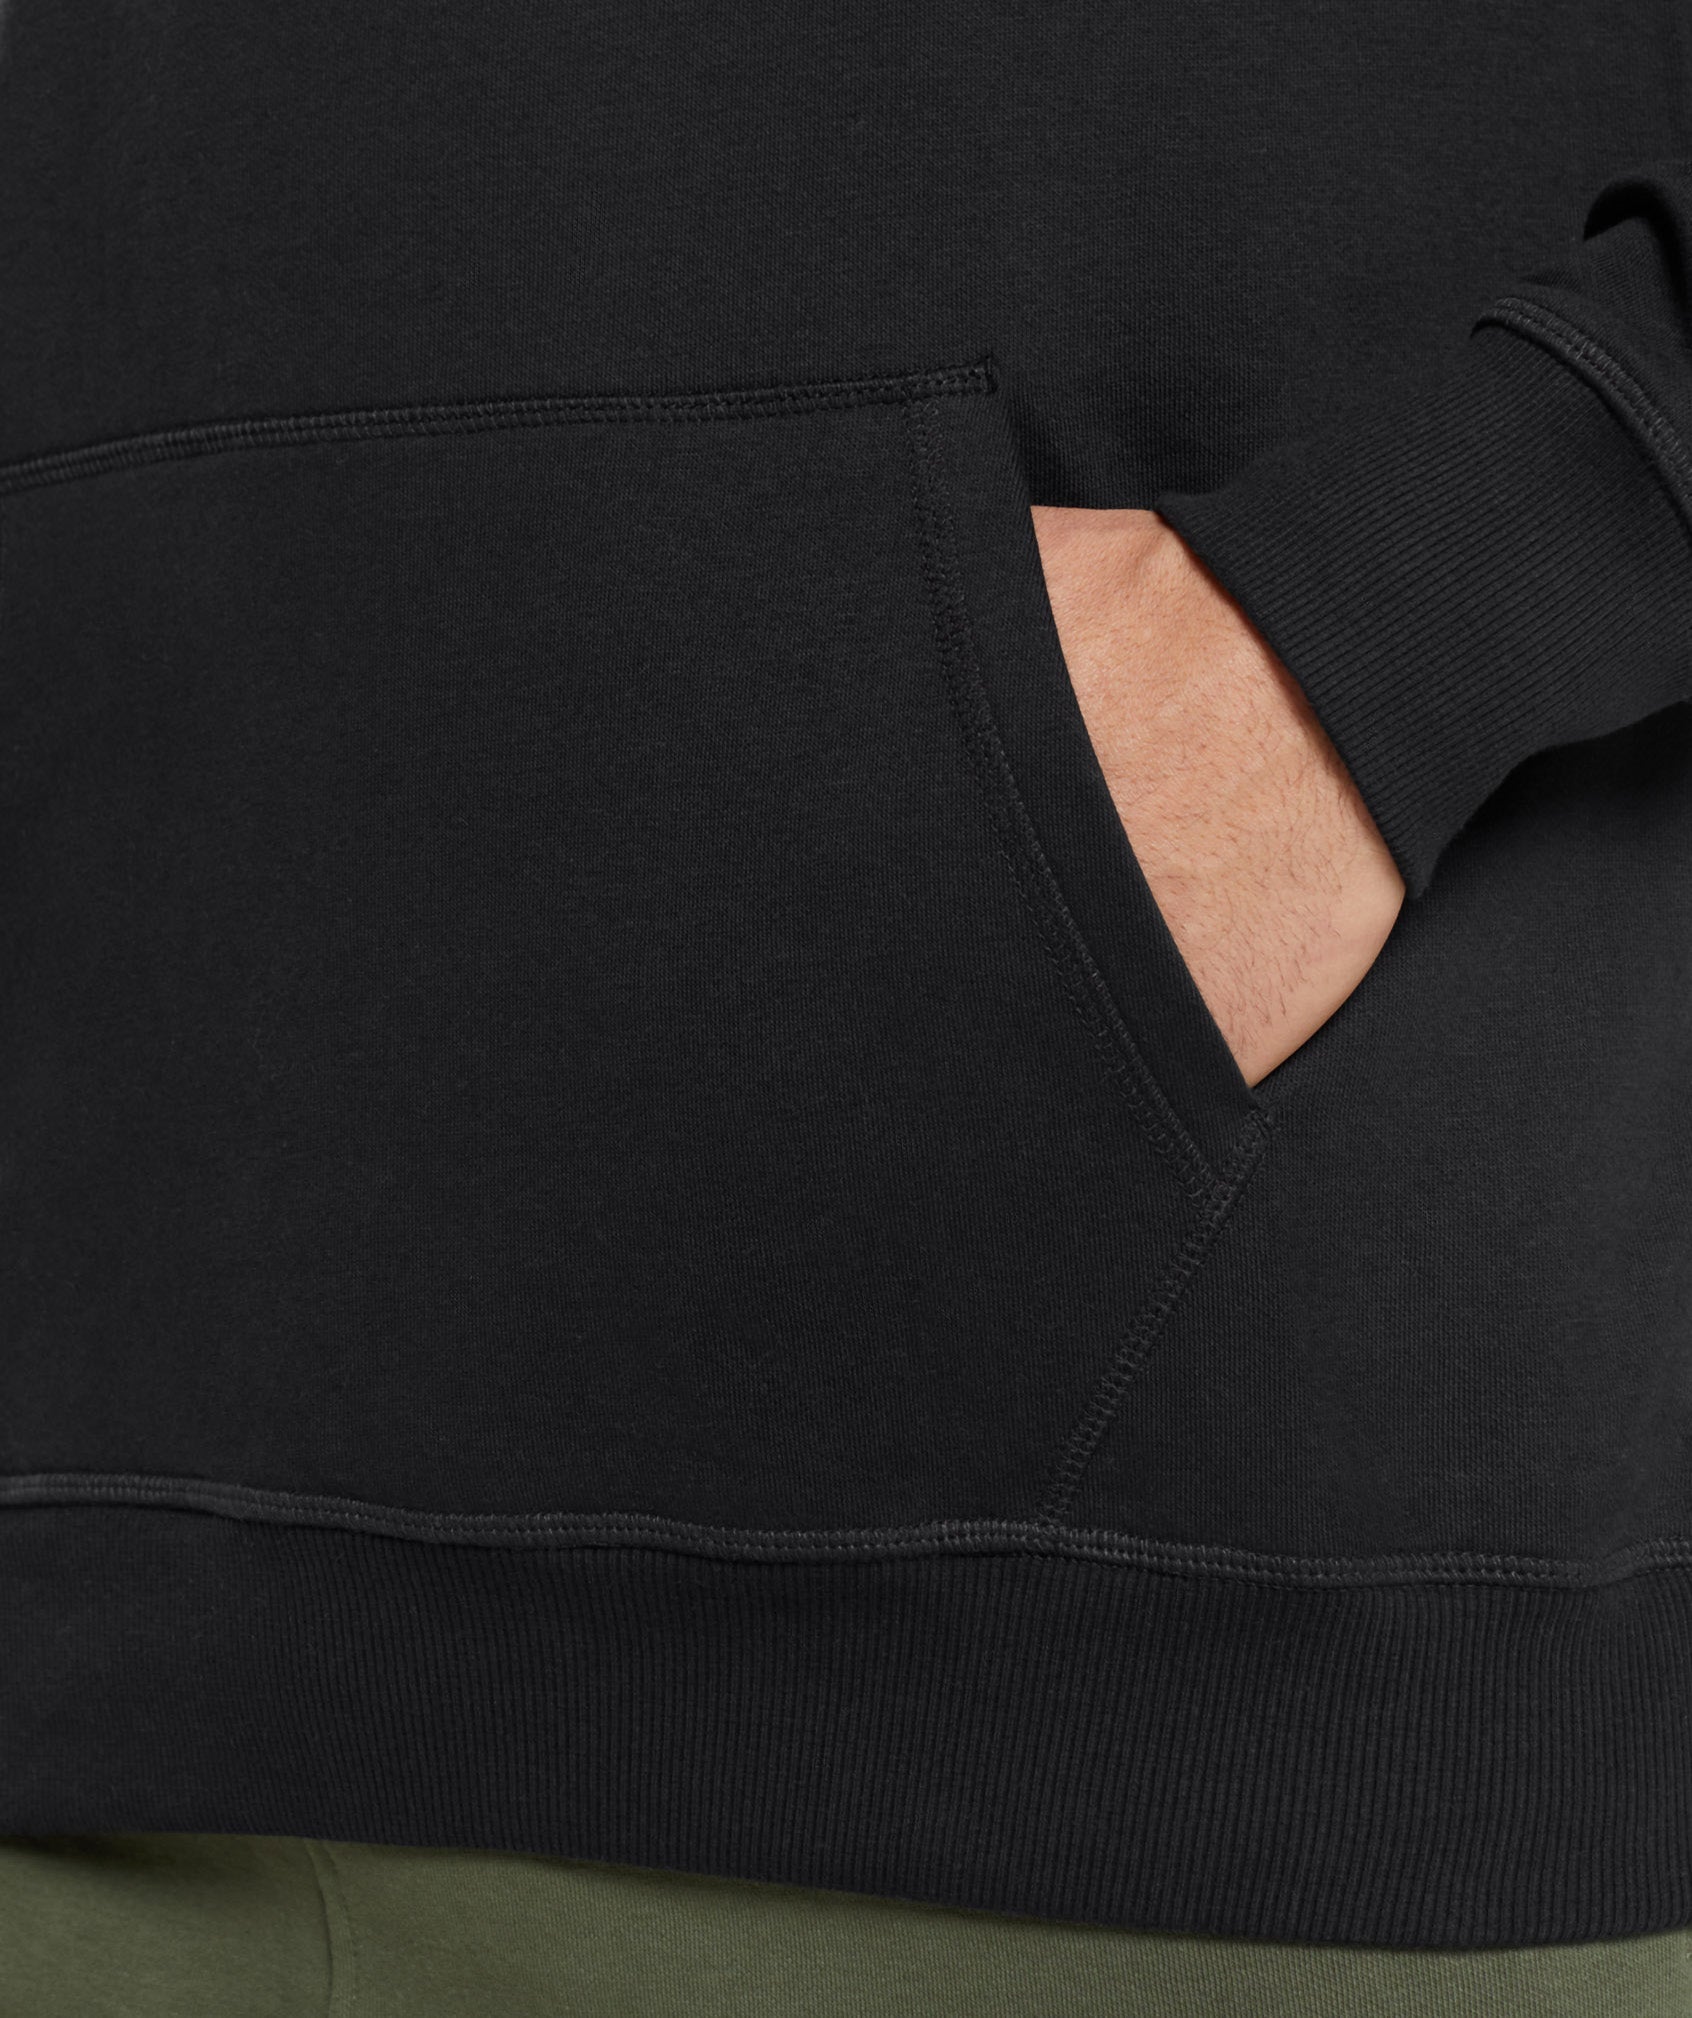 Apollo Hoodie in Black - view 6